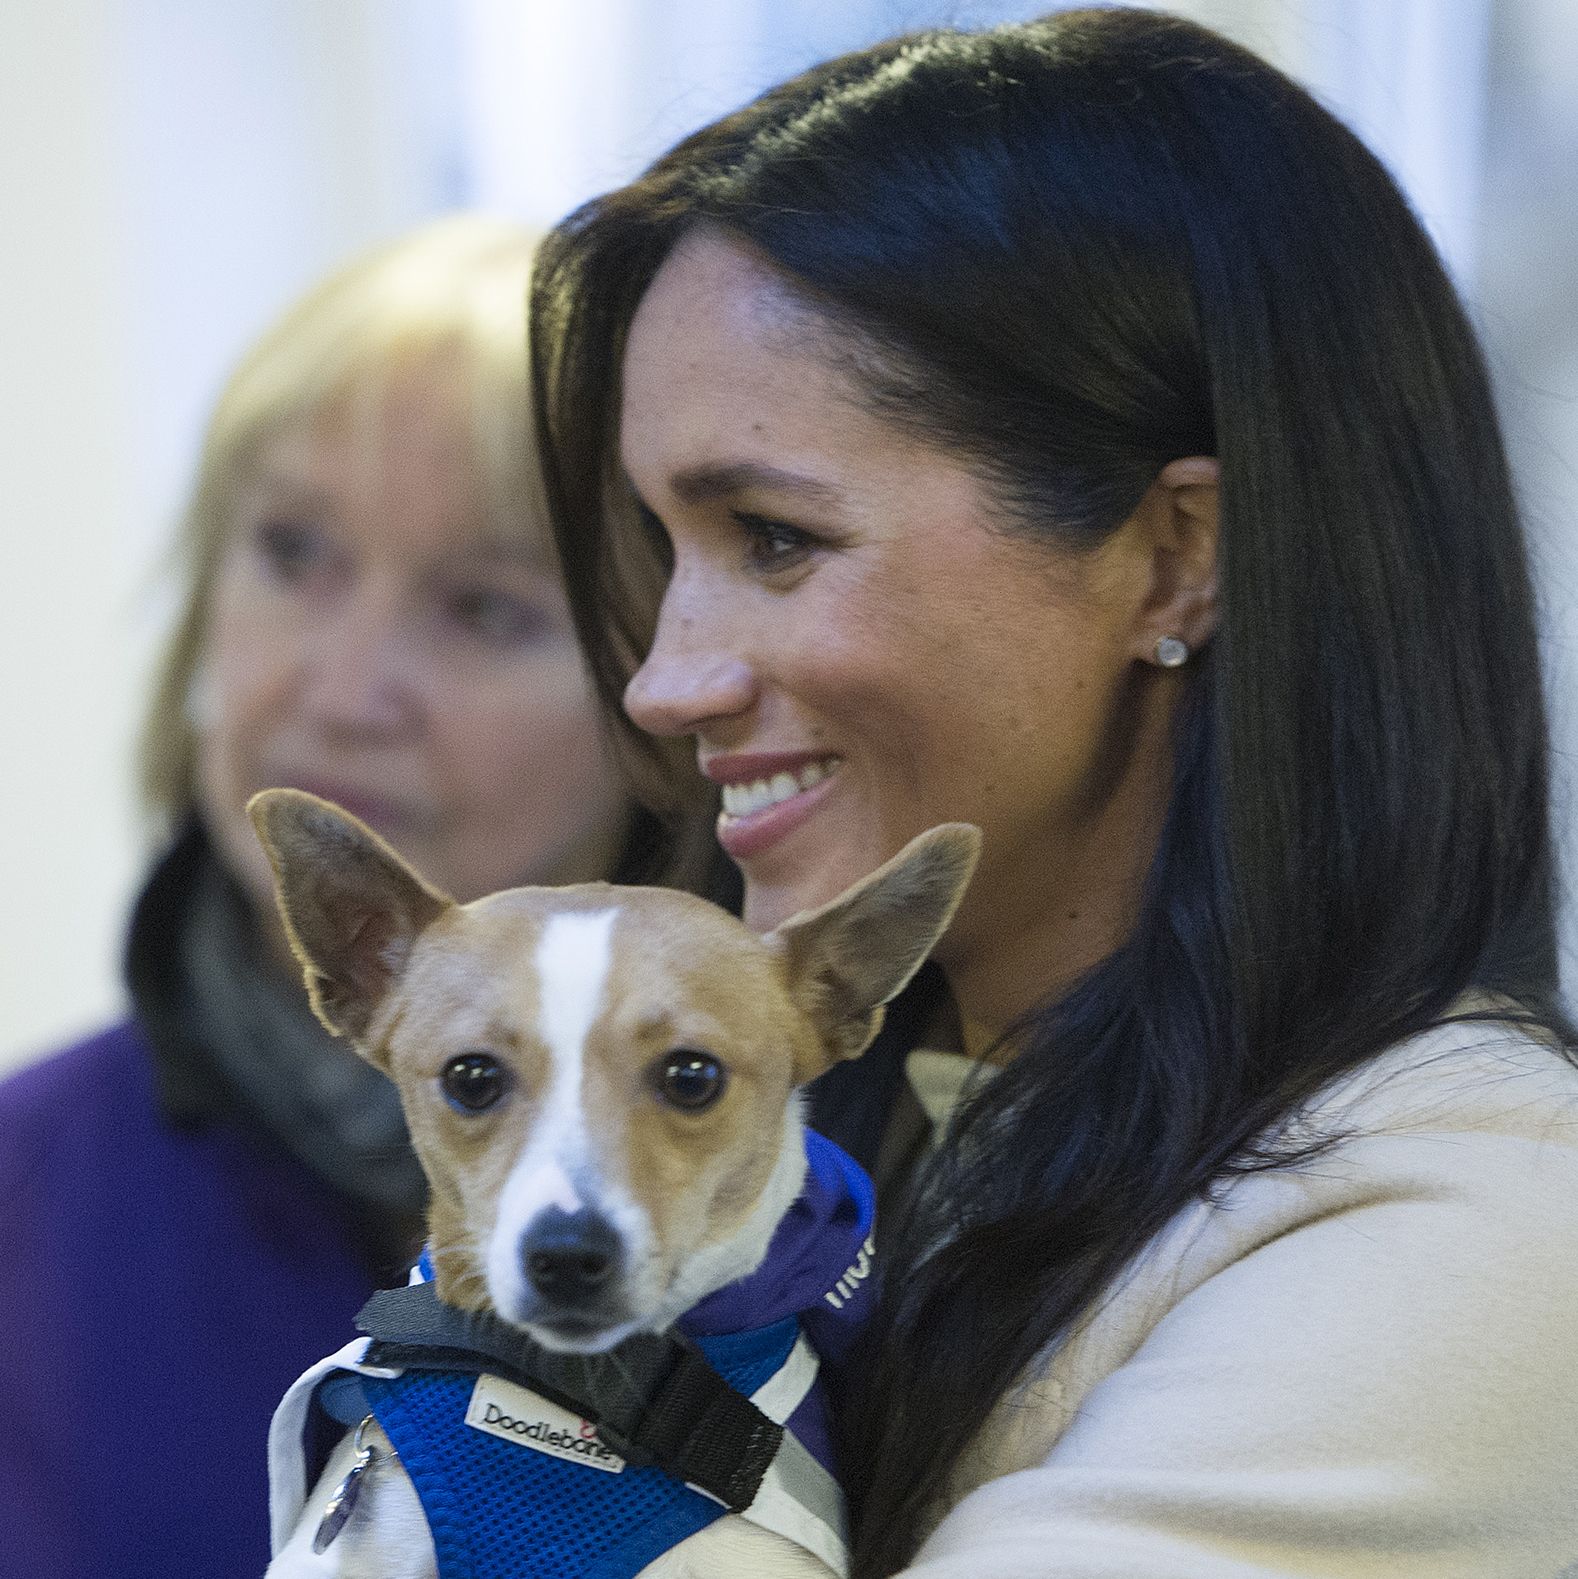 https://hips.hearstapps.com/hmg-prod.s3.amazonaws.com/images/meghan-duchess-of-sussex-meets-a-jack-russell-dog-named-news-photo-1590758084.jpg?crop=1.00xw:0.741xh;0,0